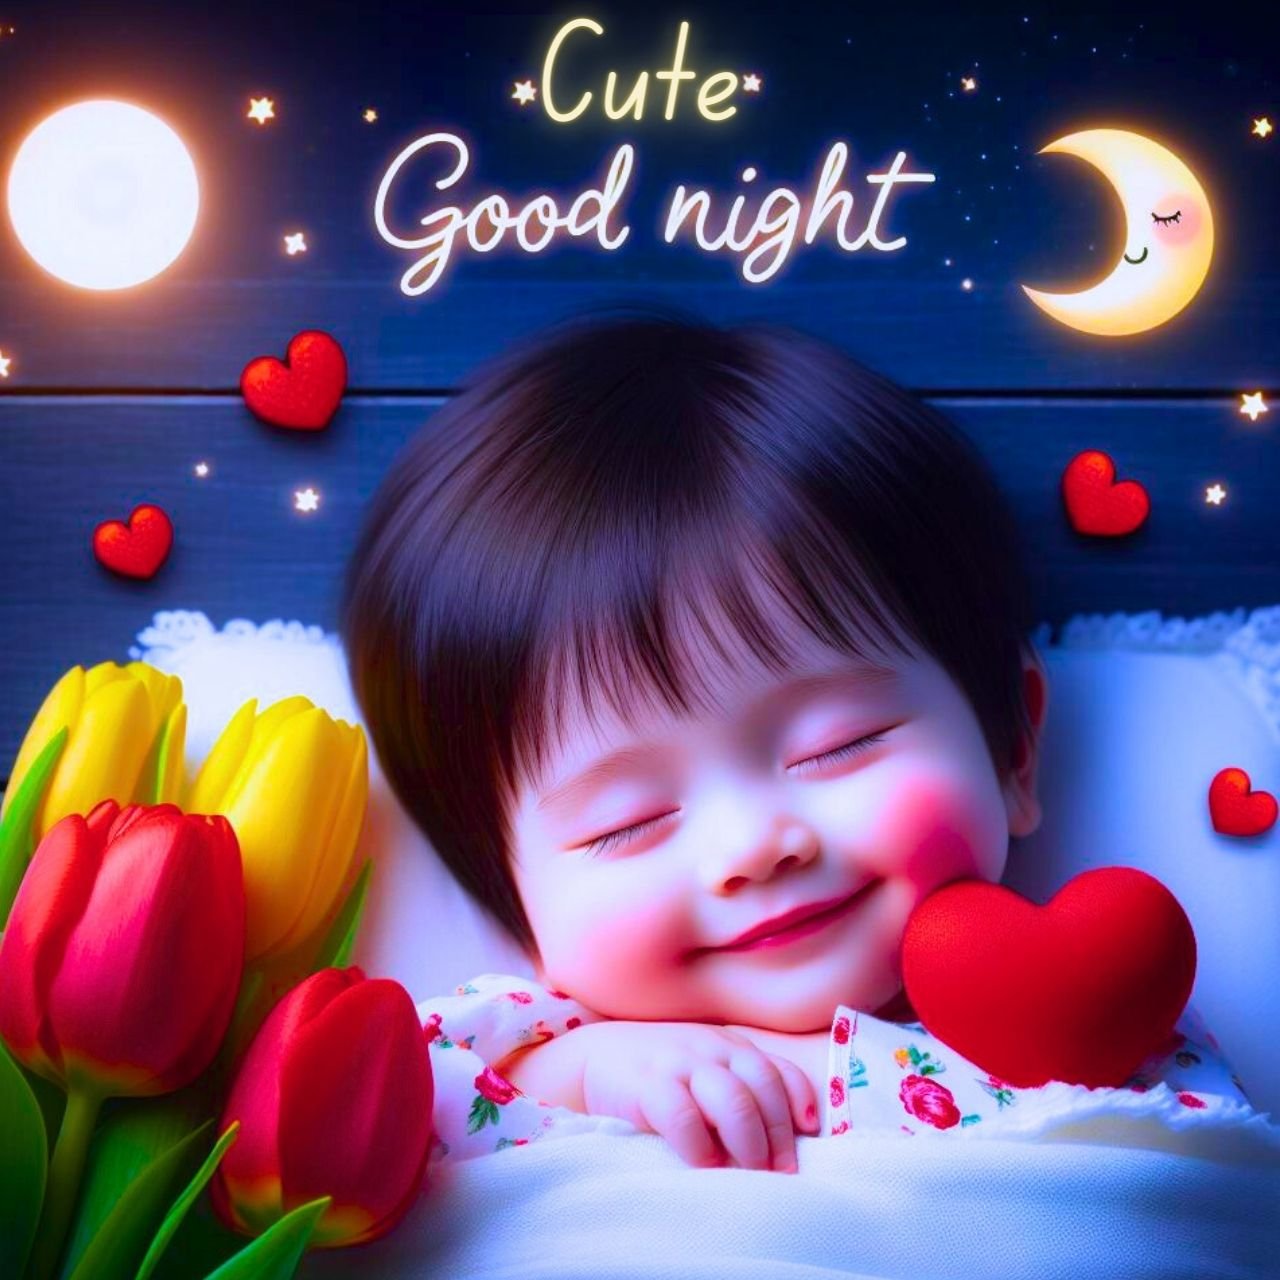 635+ Cute Good Night Images, DP, Pictures, Photos & Wallpapers New 2024